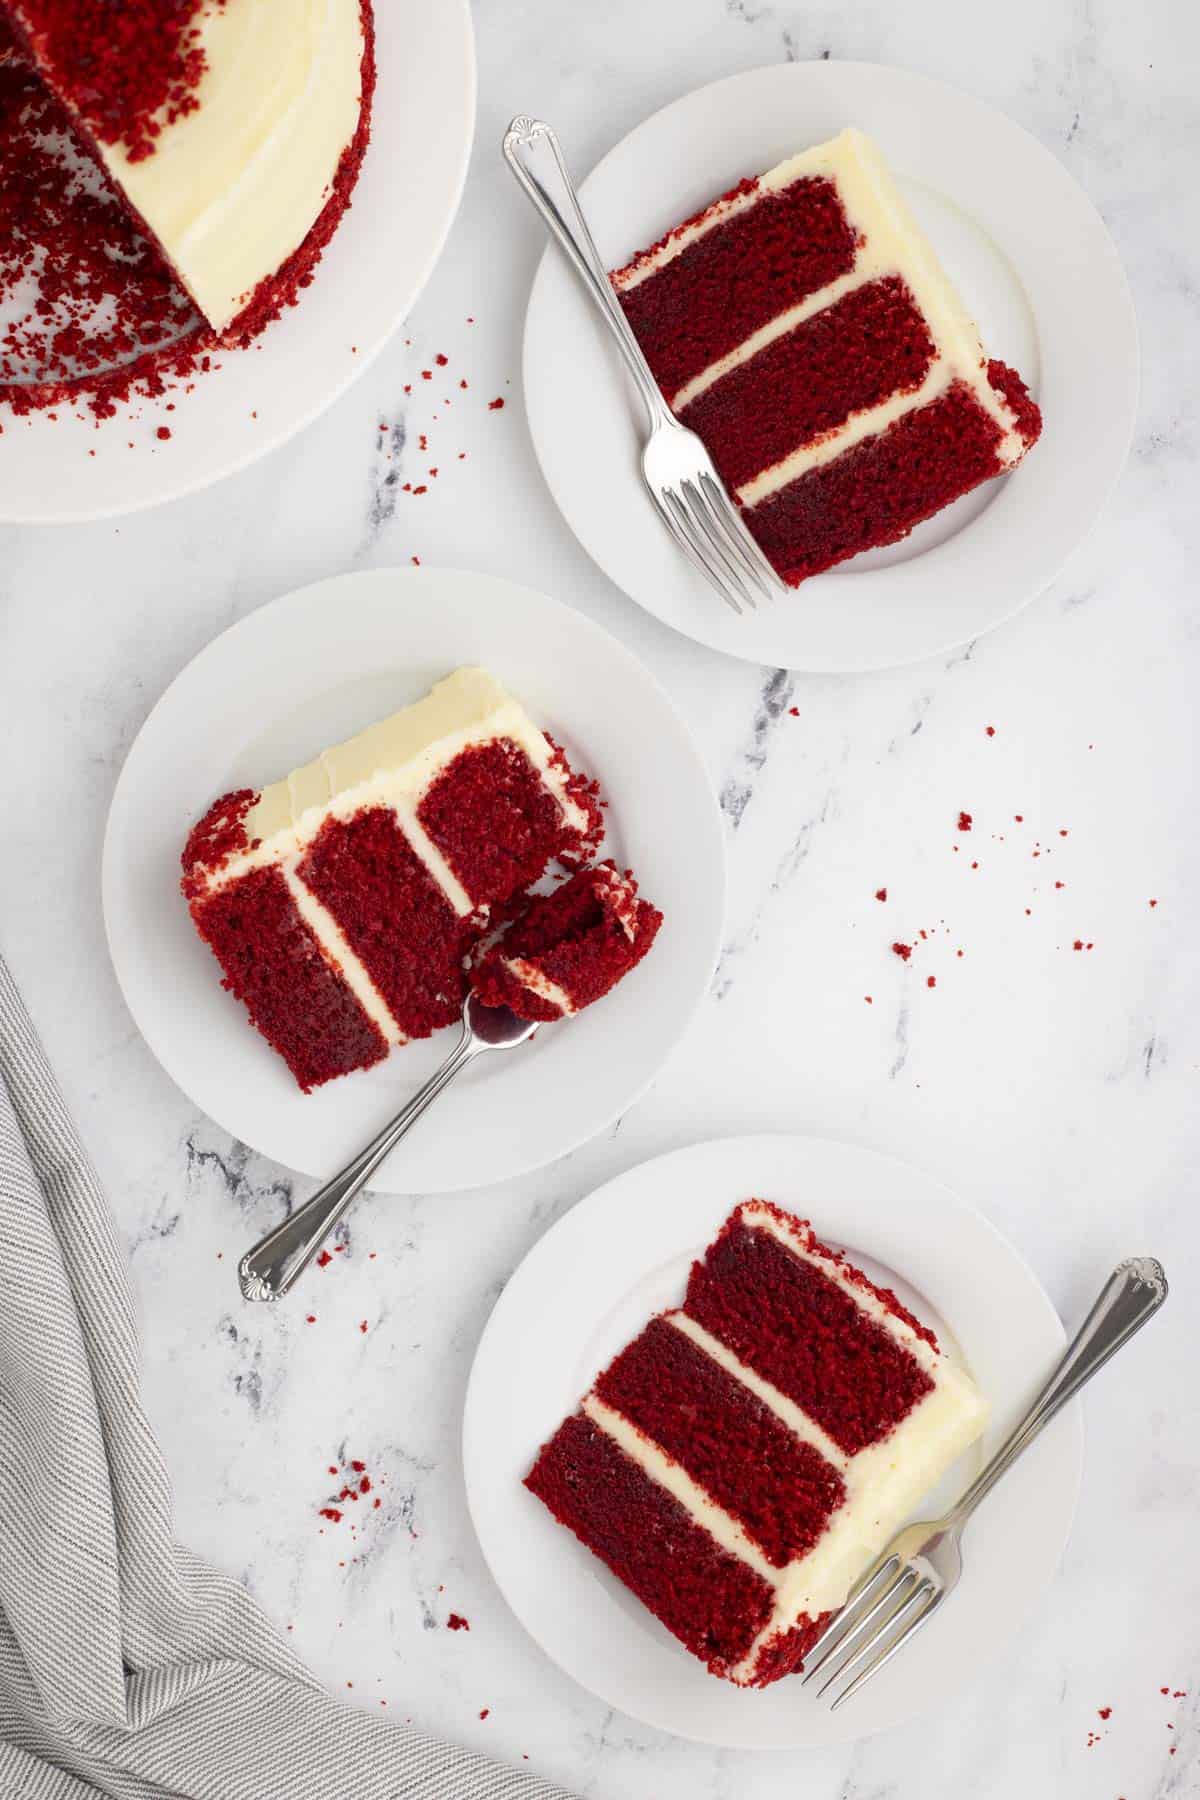 the overhead view of three slices of red velvet cake on white plates with forks beside another white plate with the remainder of the cake on it